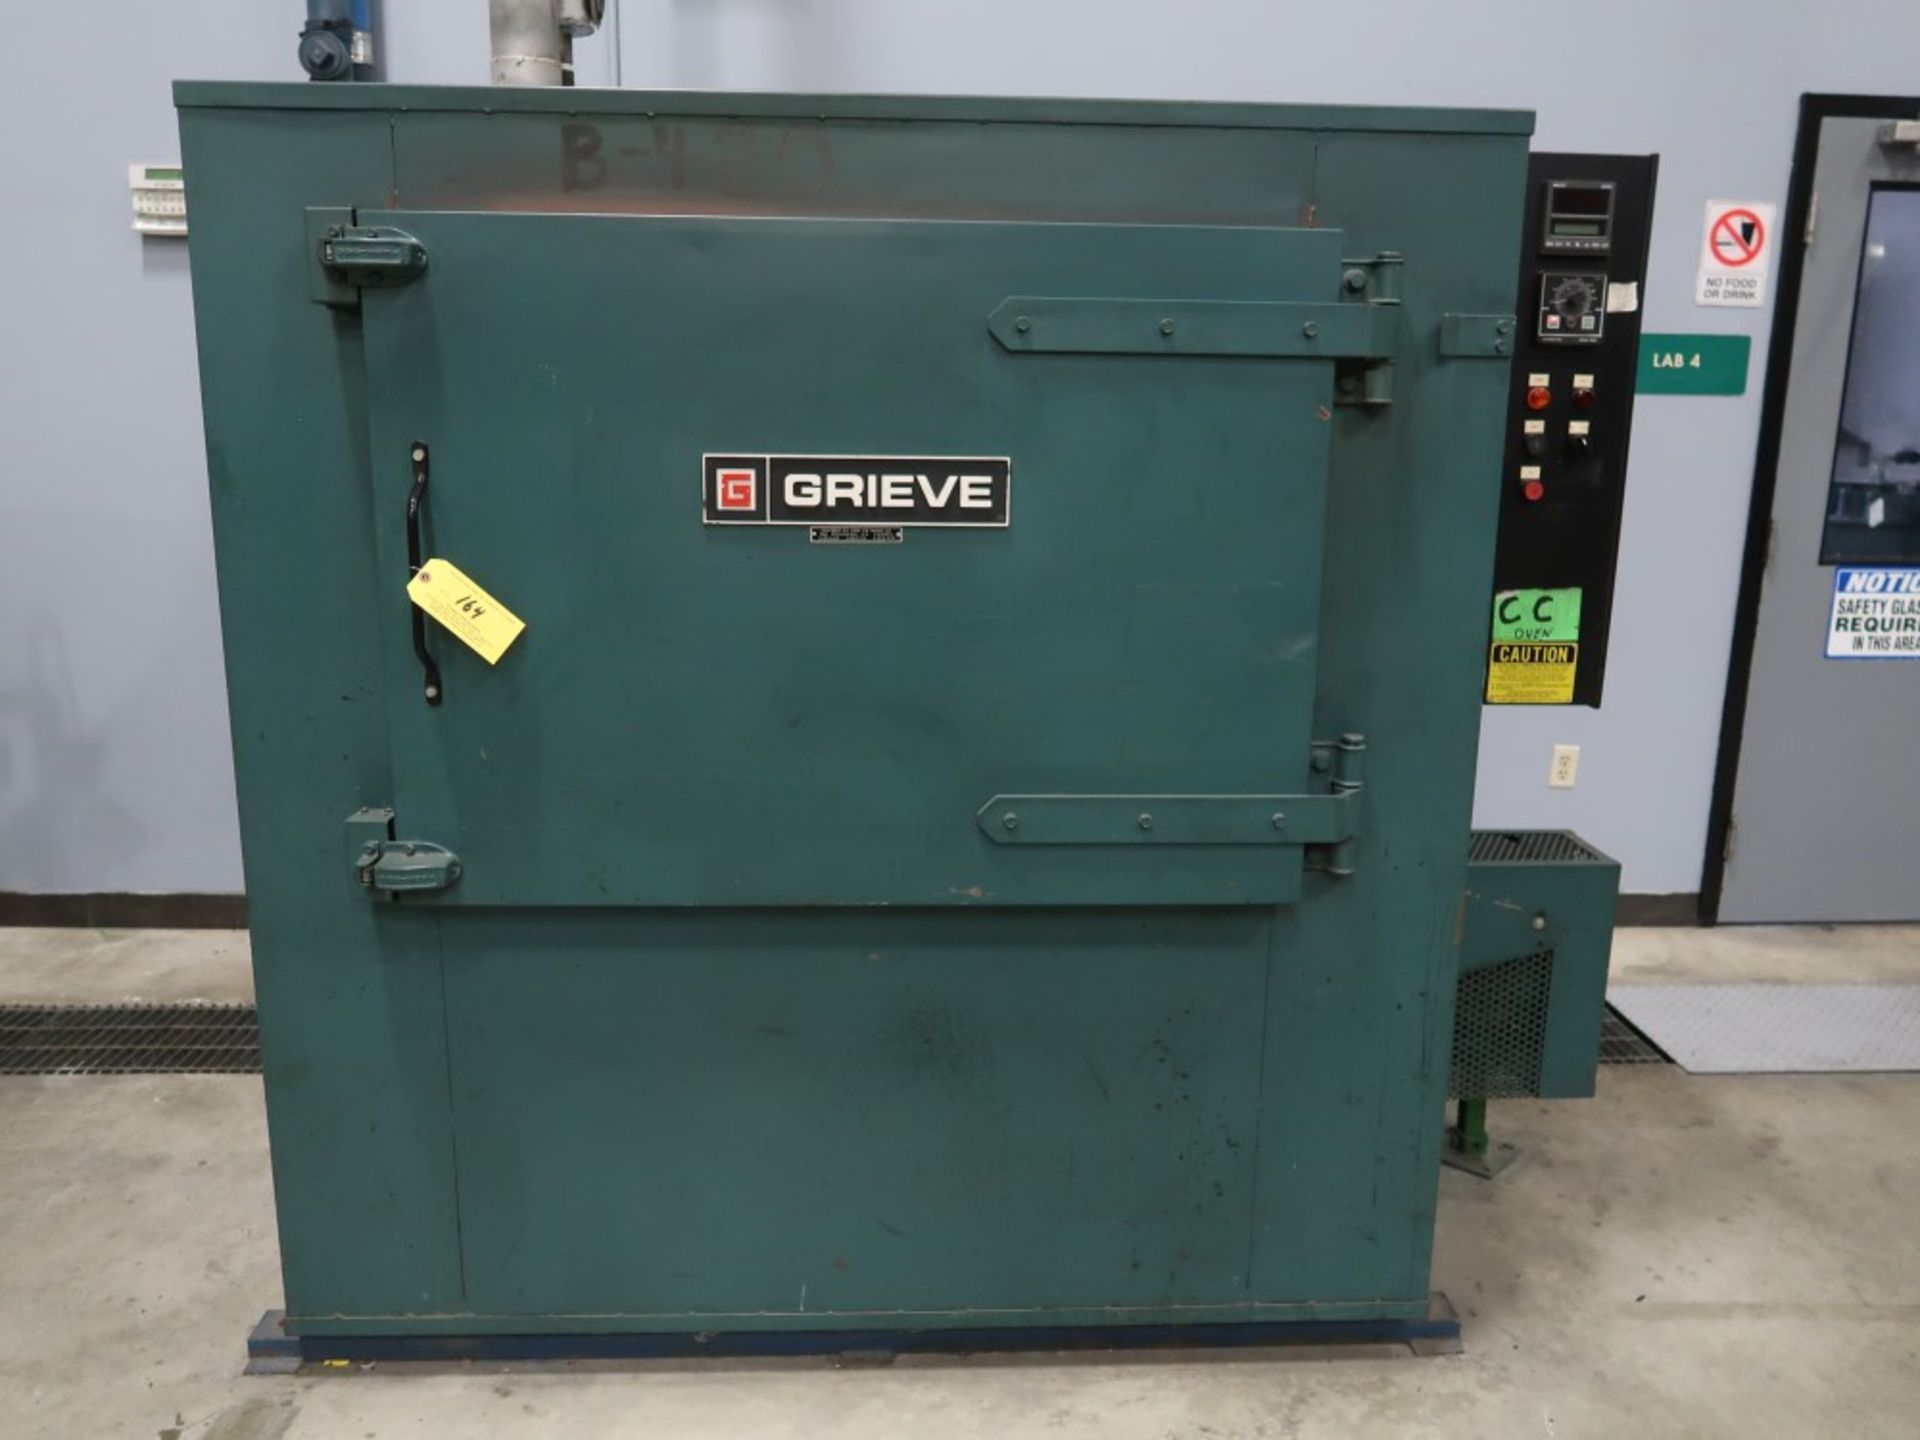 Grieve Model HX-1250 Electric Oven S/N 500021, 37" W x 26" H x 19" D, Max Temp 1250 Degrees F w/ (4) - Image 2 of 7